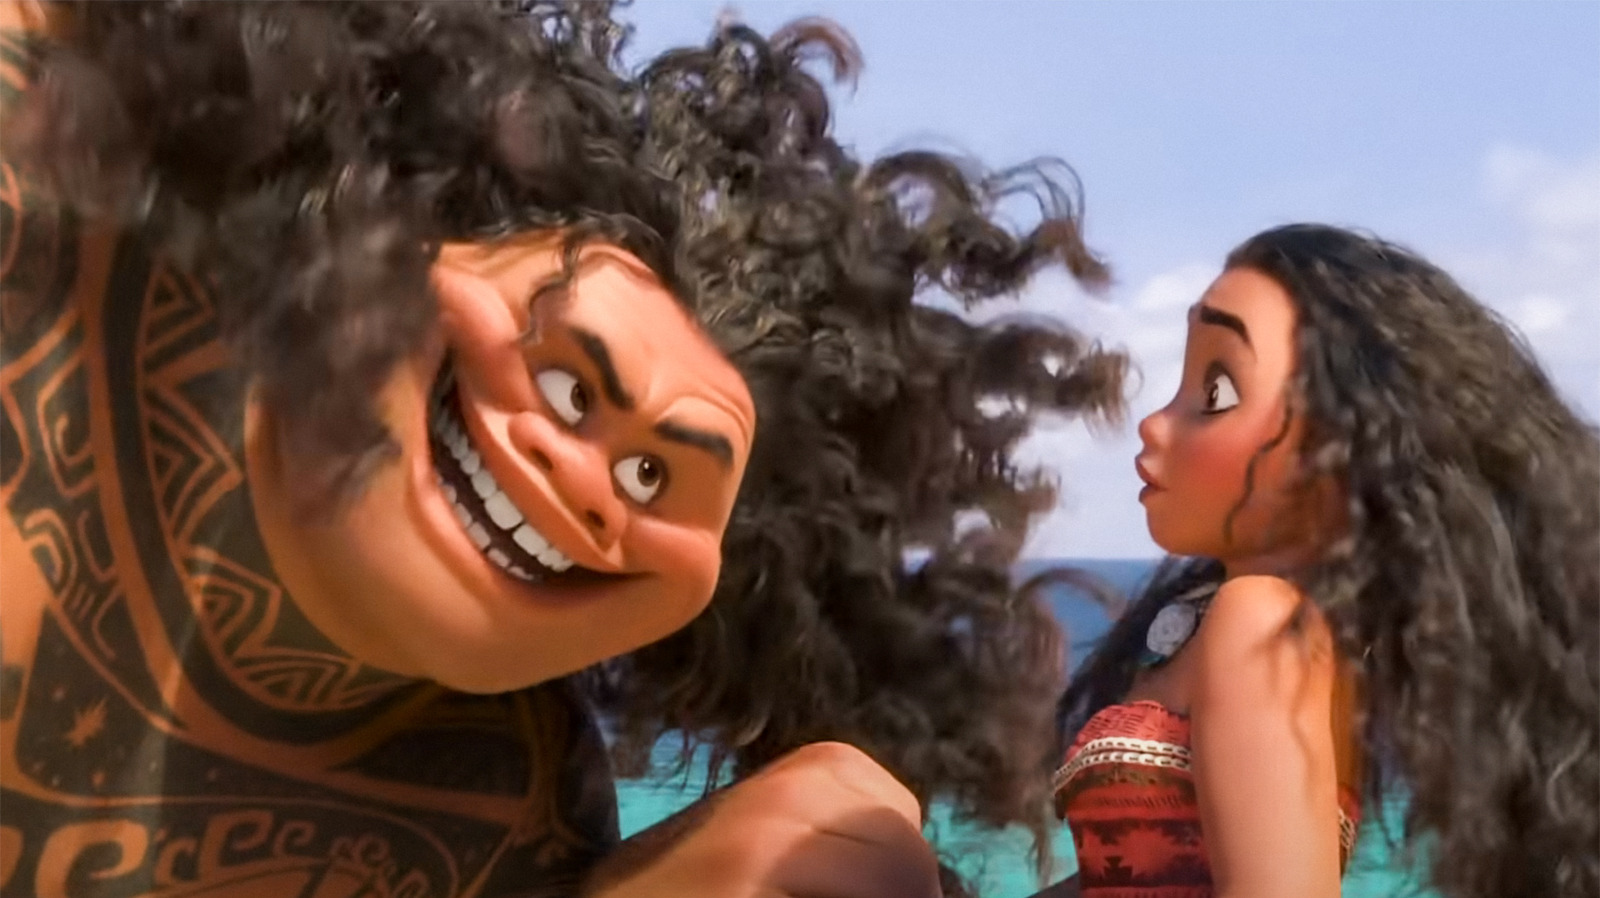 Disney Announces Live Action Remake Of Moana With Dwayne Johnson Just 6 Years After The Original